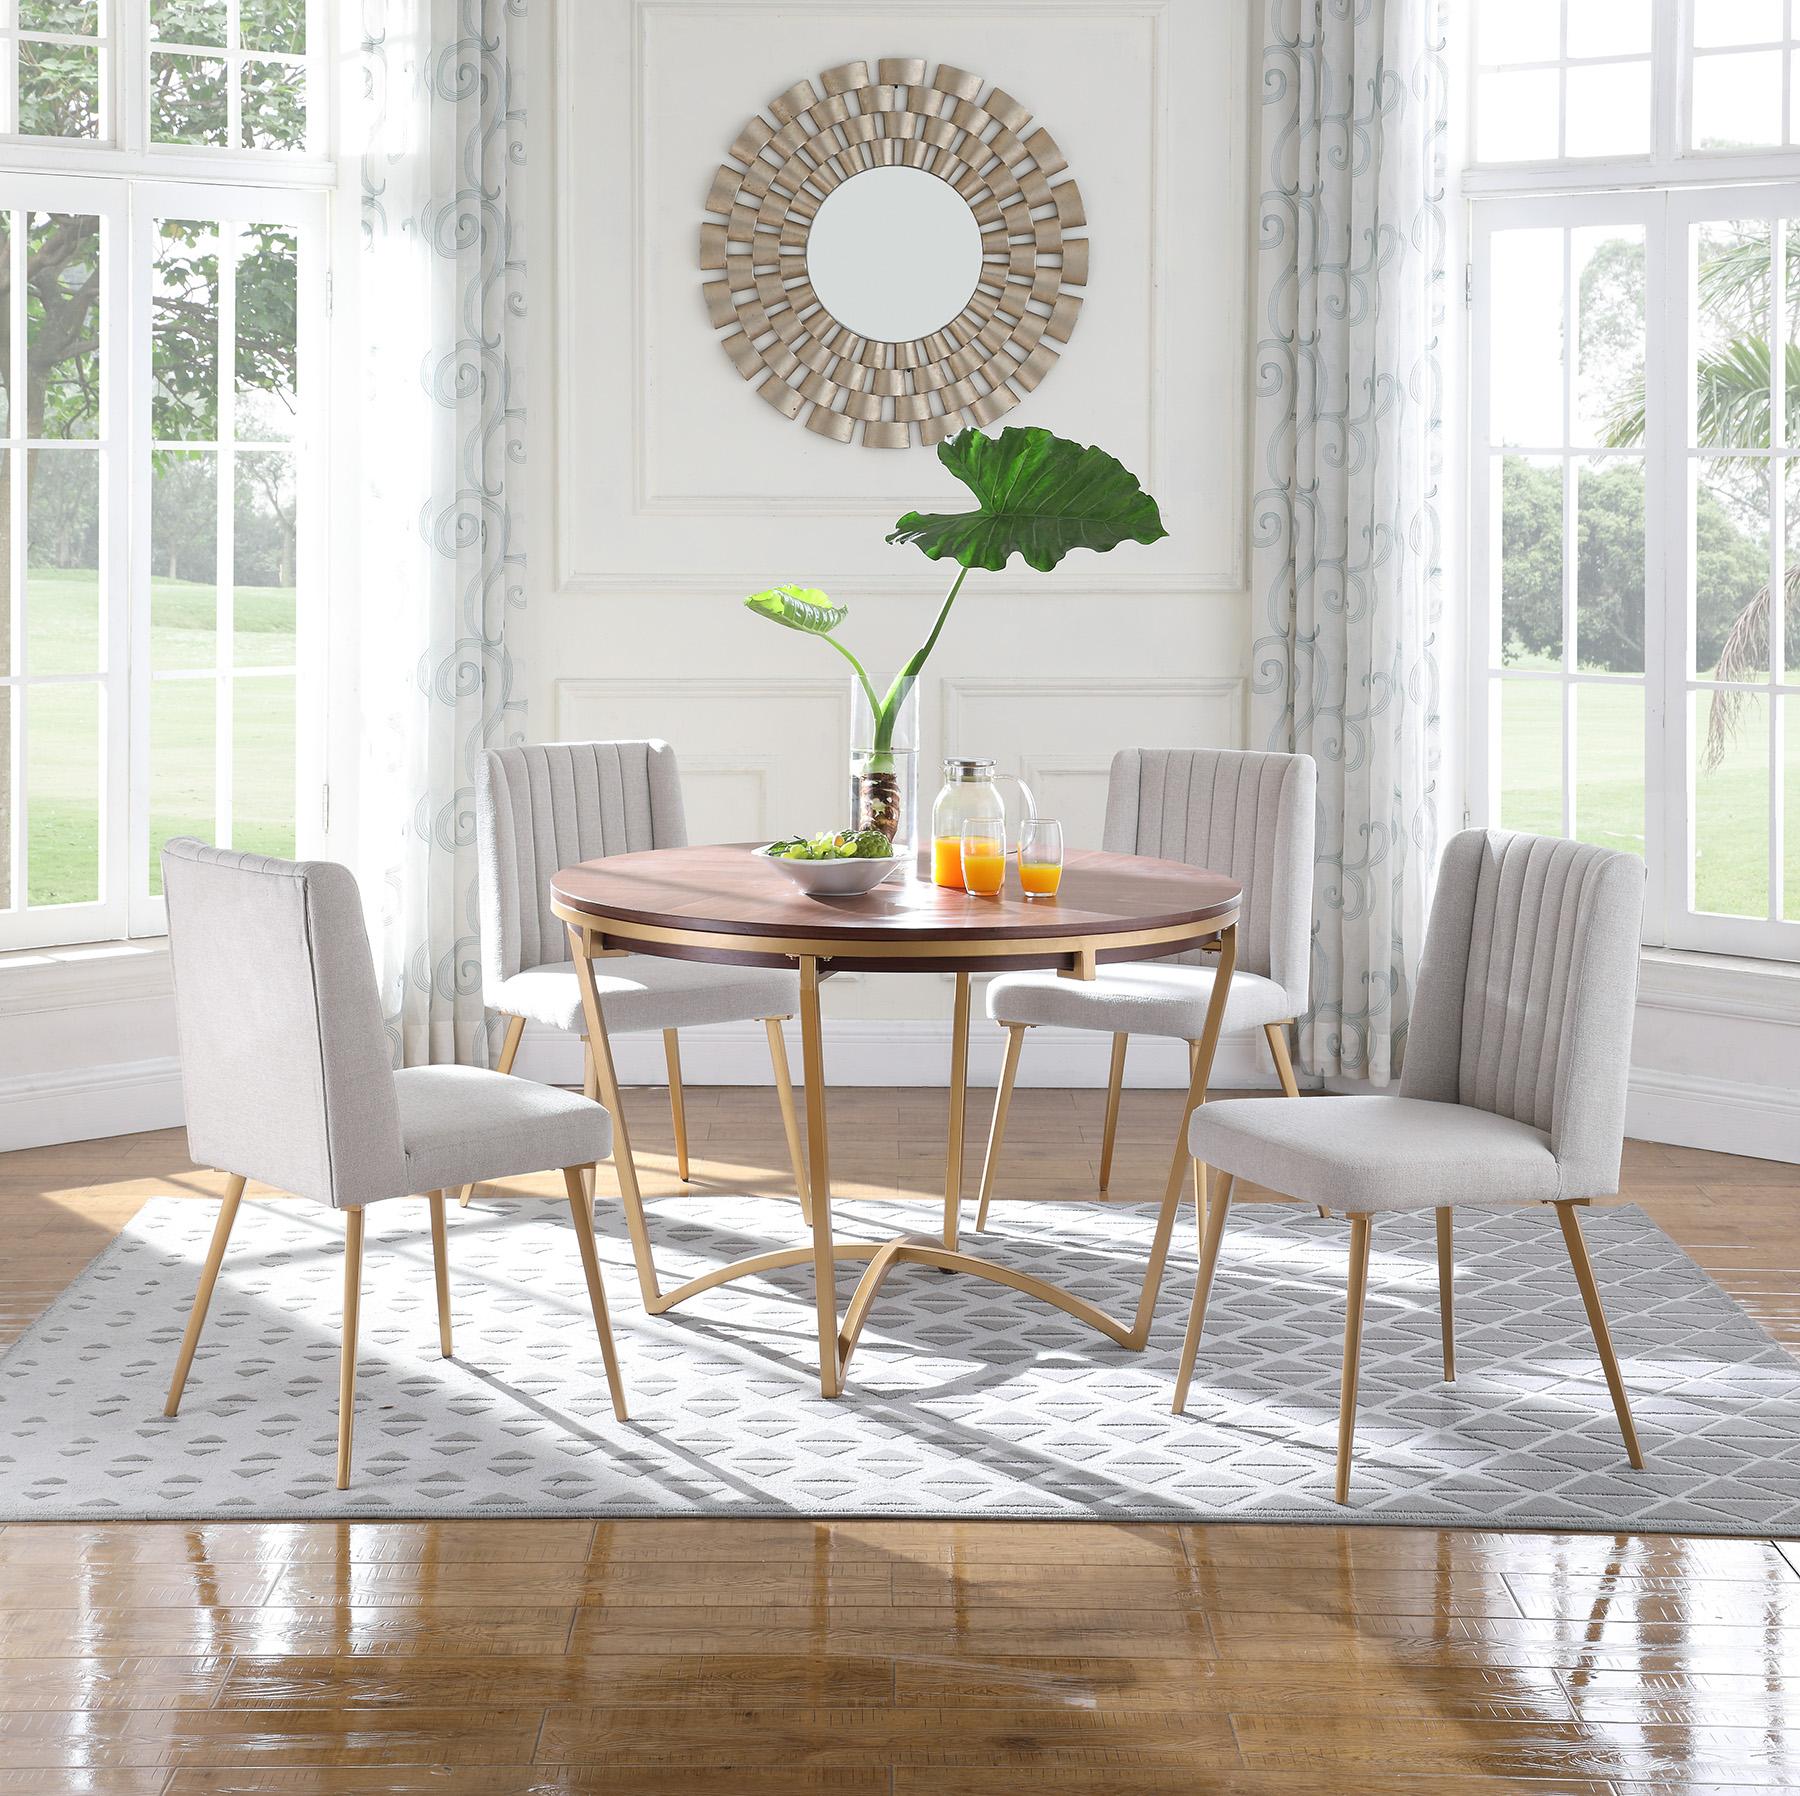 Contemporary, Modern Dining Table Set ELEANOR 932-T-Set-5 932-T-Set-5 in Walnut, Gray, Gold Fabric